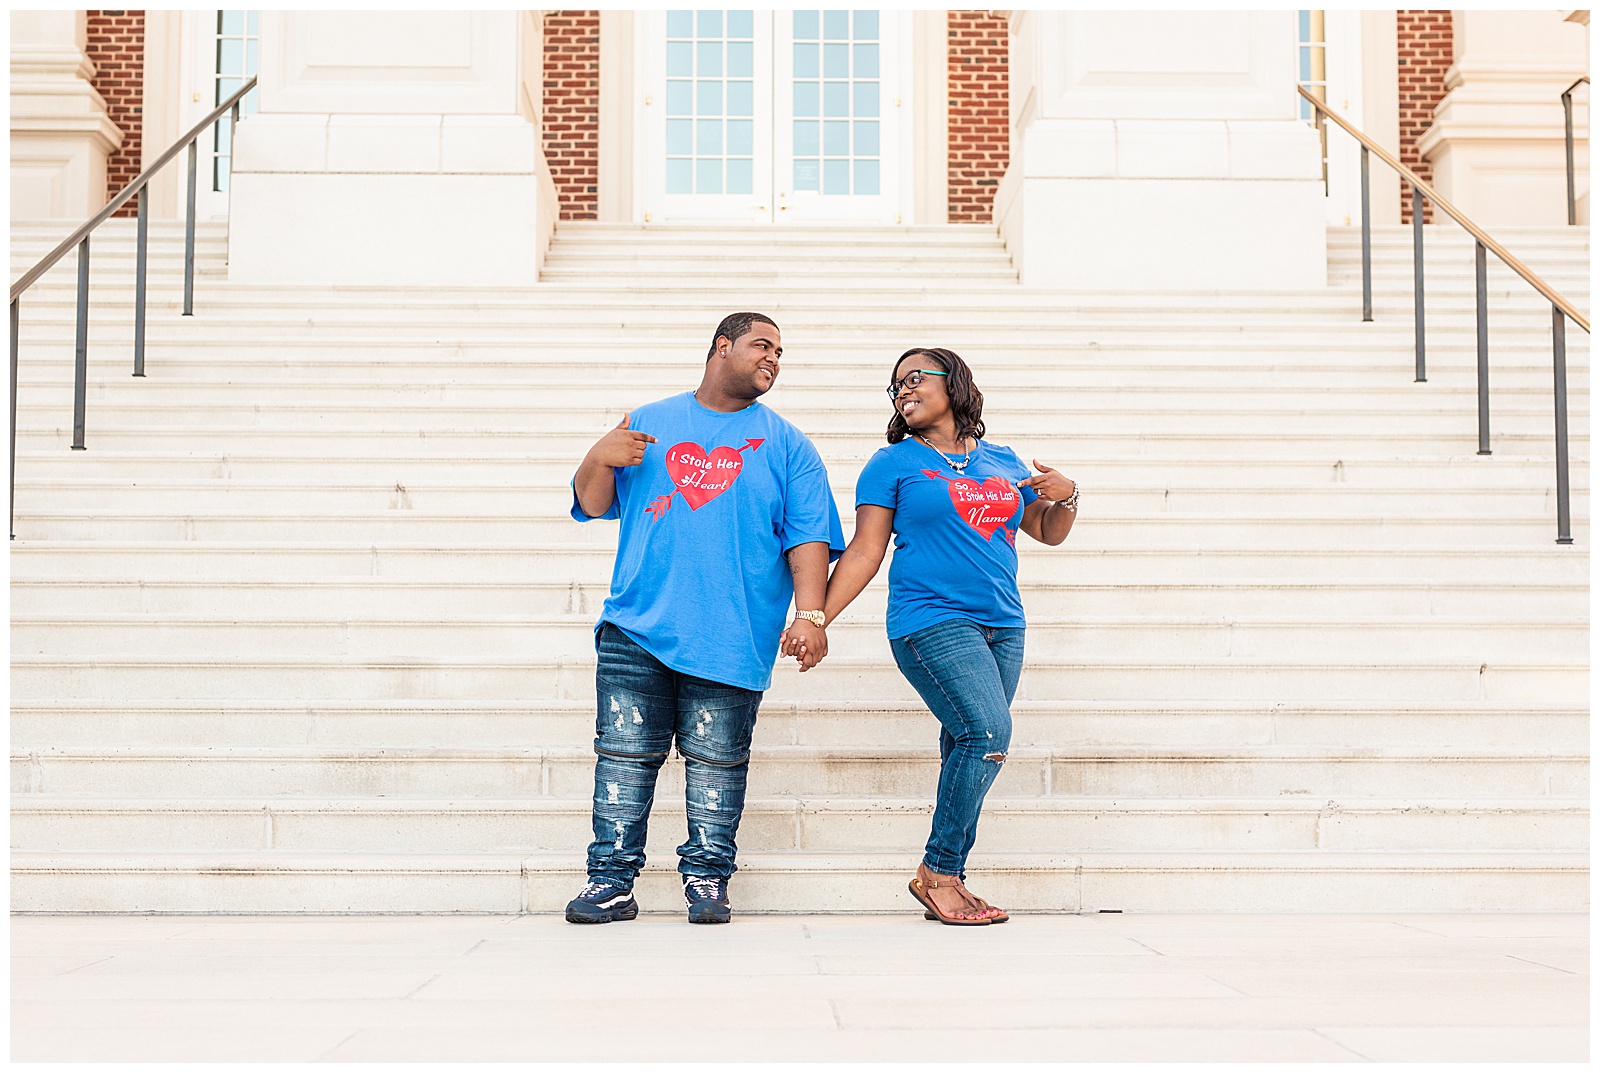 cnu-summer-engagement-session-charneice-kevin-17.jpg